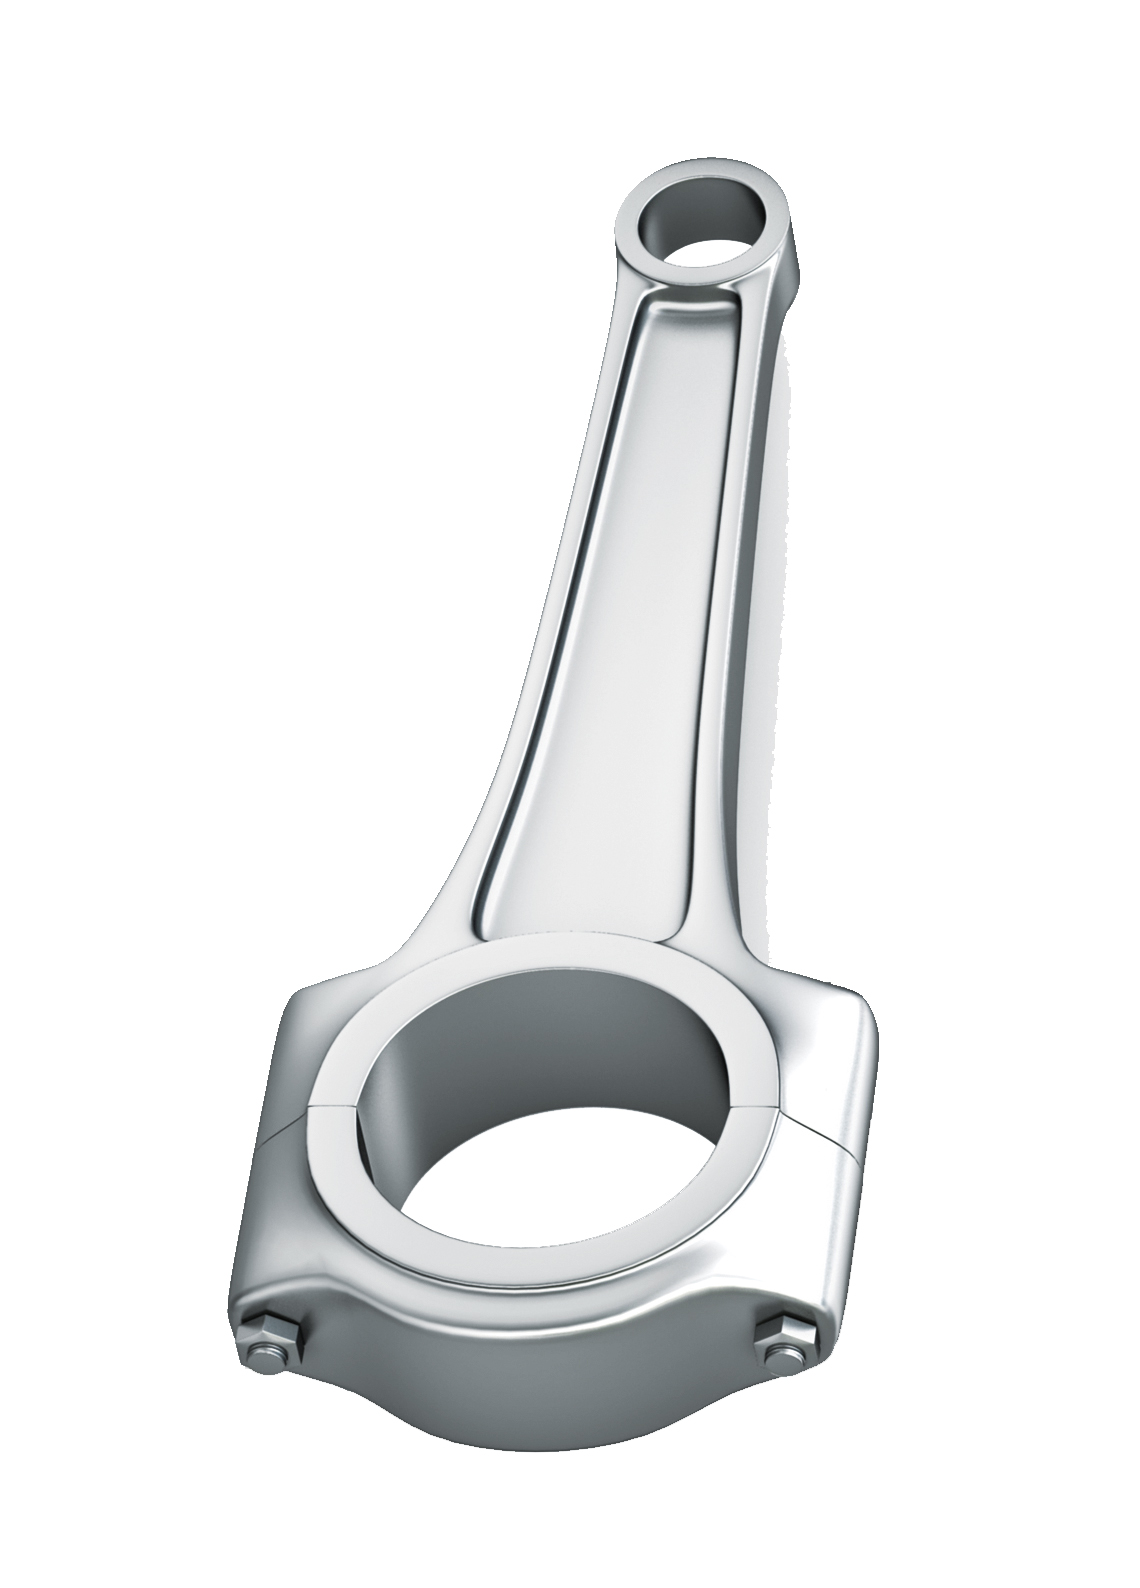 Figure 4: Image of a connecting rod.